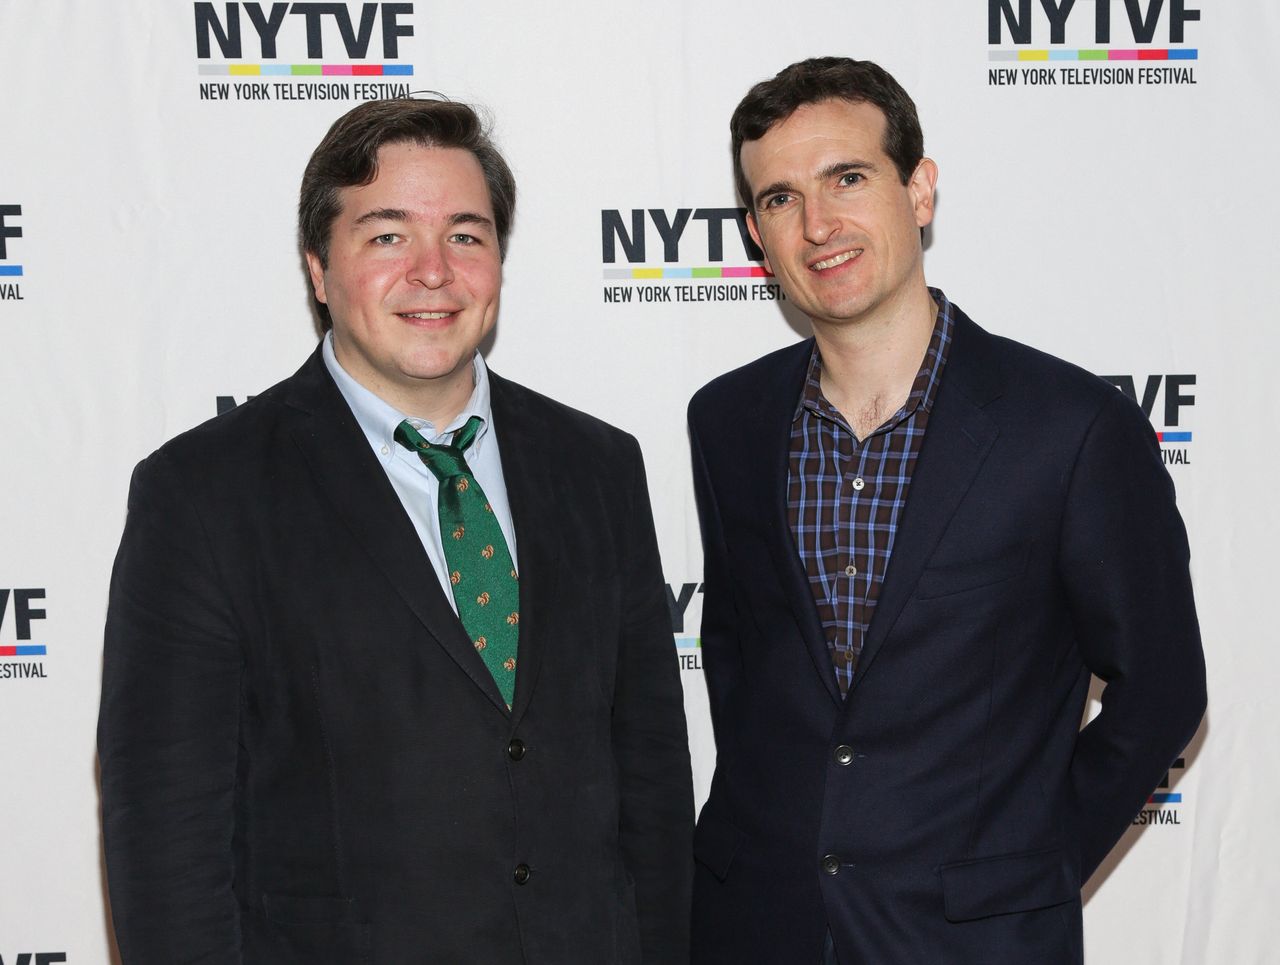 Creators of 'How I Met Your Mother' Carter Bays (L) and Craig Thomas attend the 12th Annual New York Television Festival held at Helen Mills Theater on October 24, 2016 in New York City.